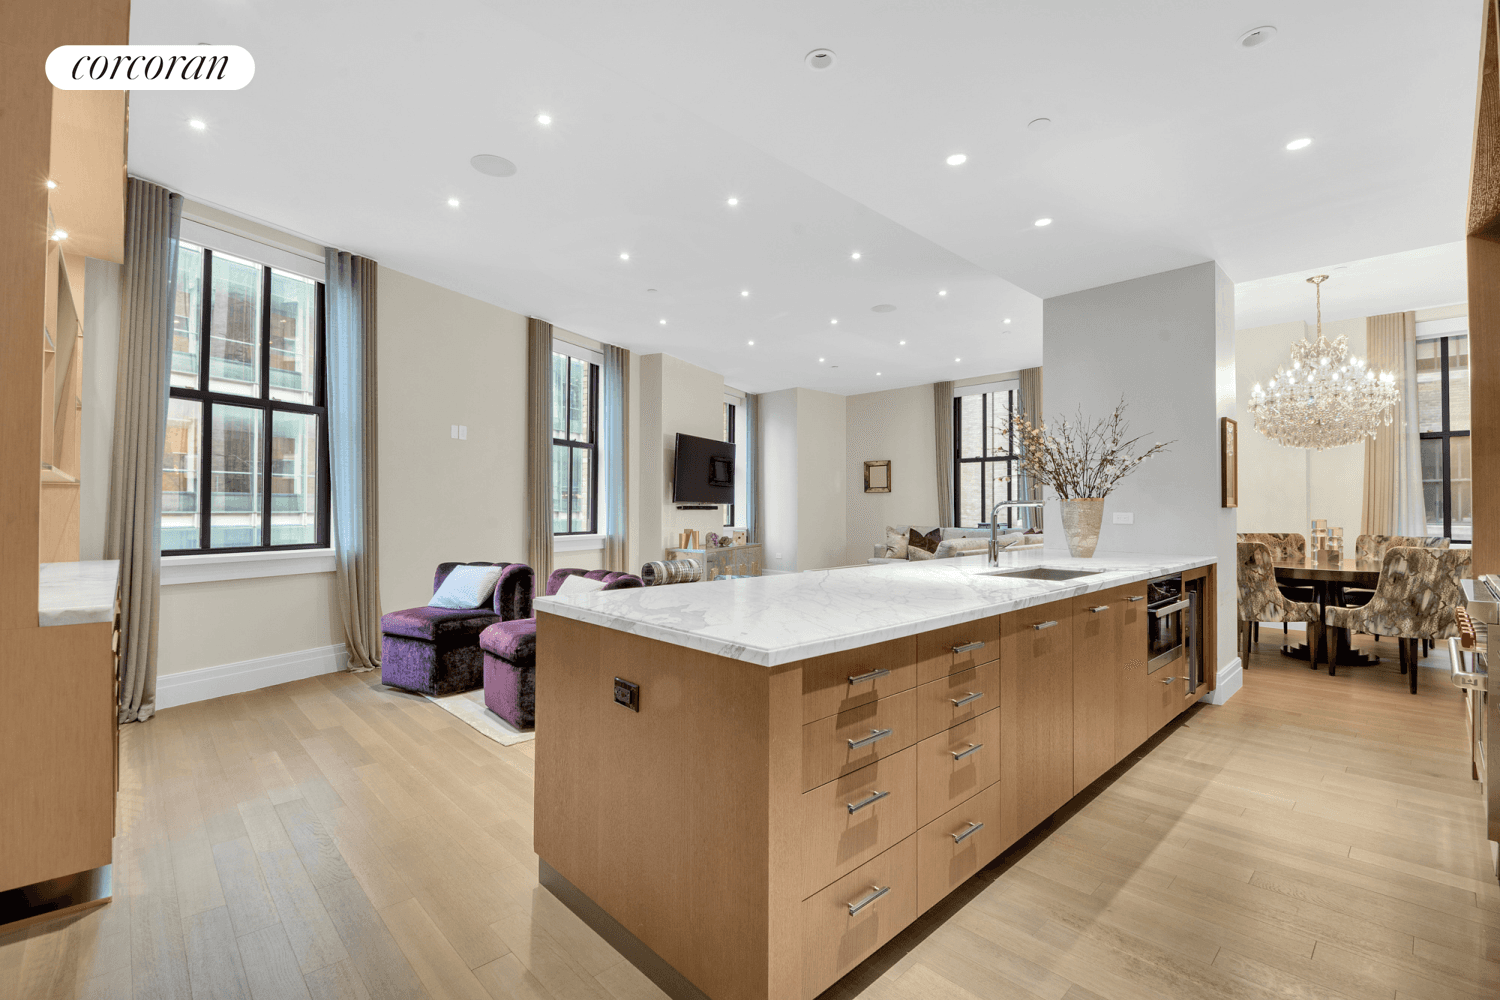 PRICED TO SELL ! Welcome to 100 Barclay, an iconic and chic loft style condominium in Tribeca.